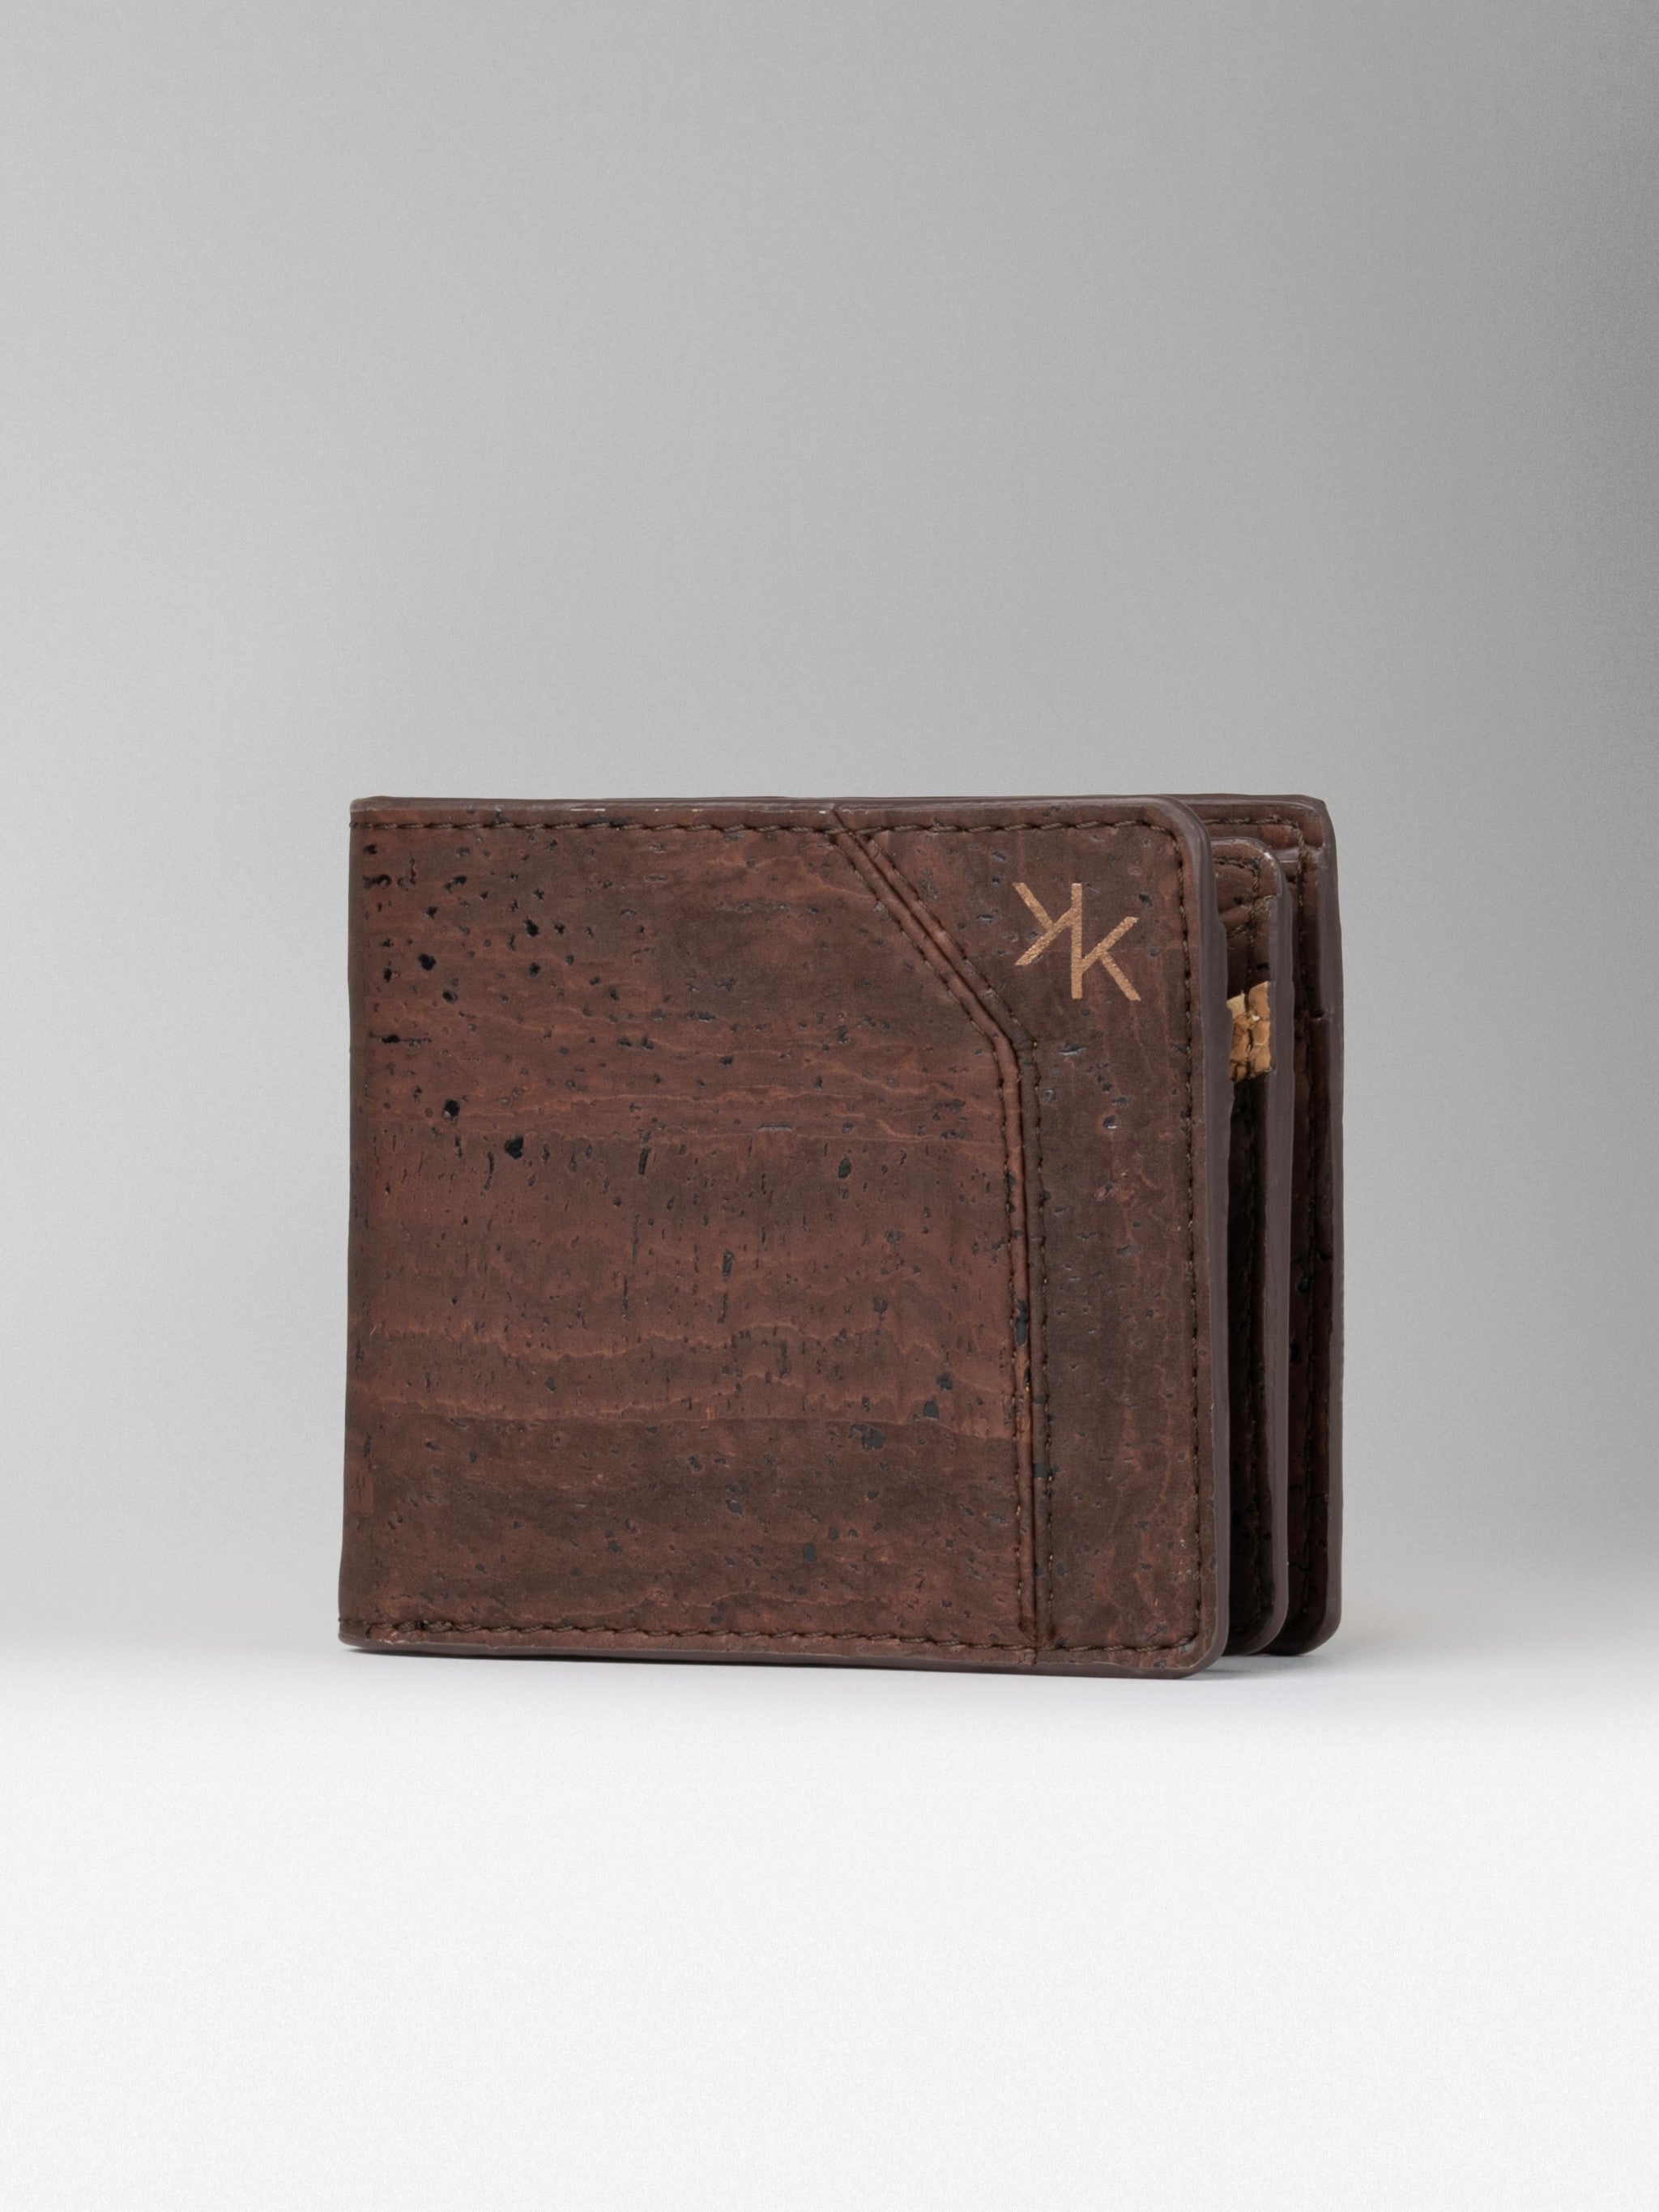 Cork Bifold Wallets From the Top Wallet Brands in India